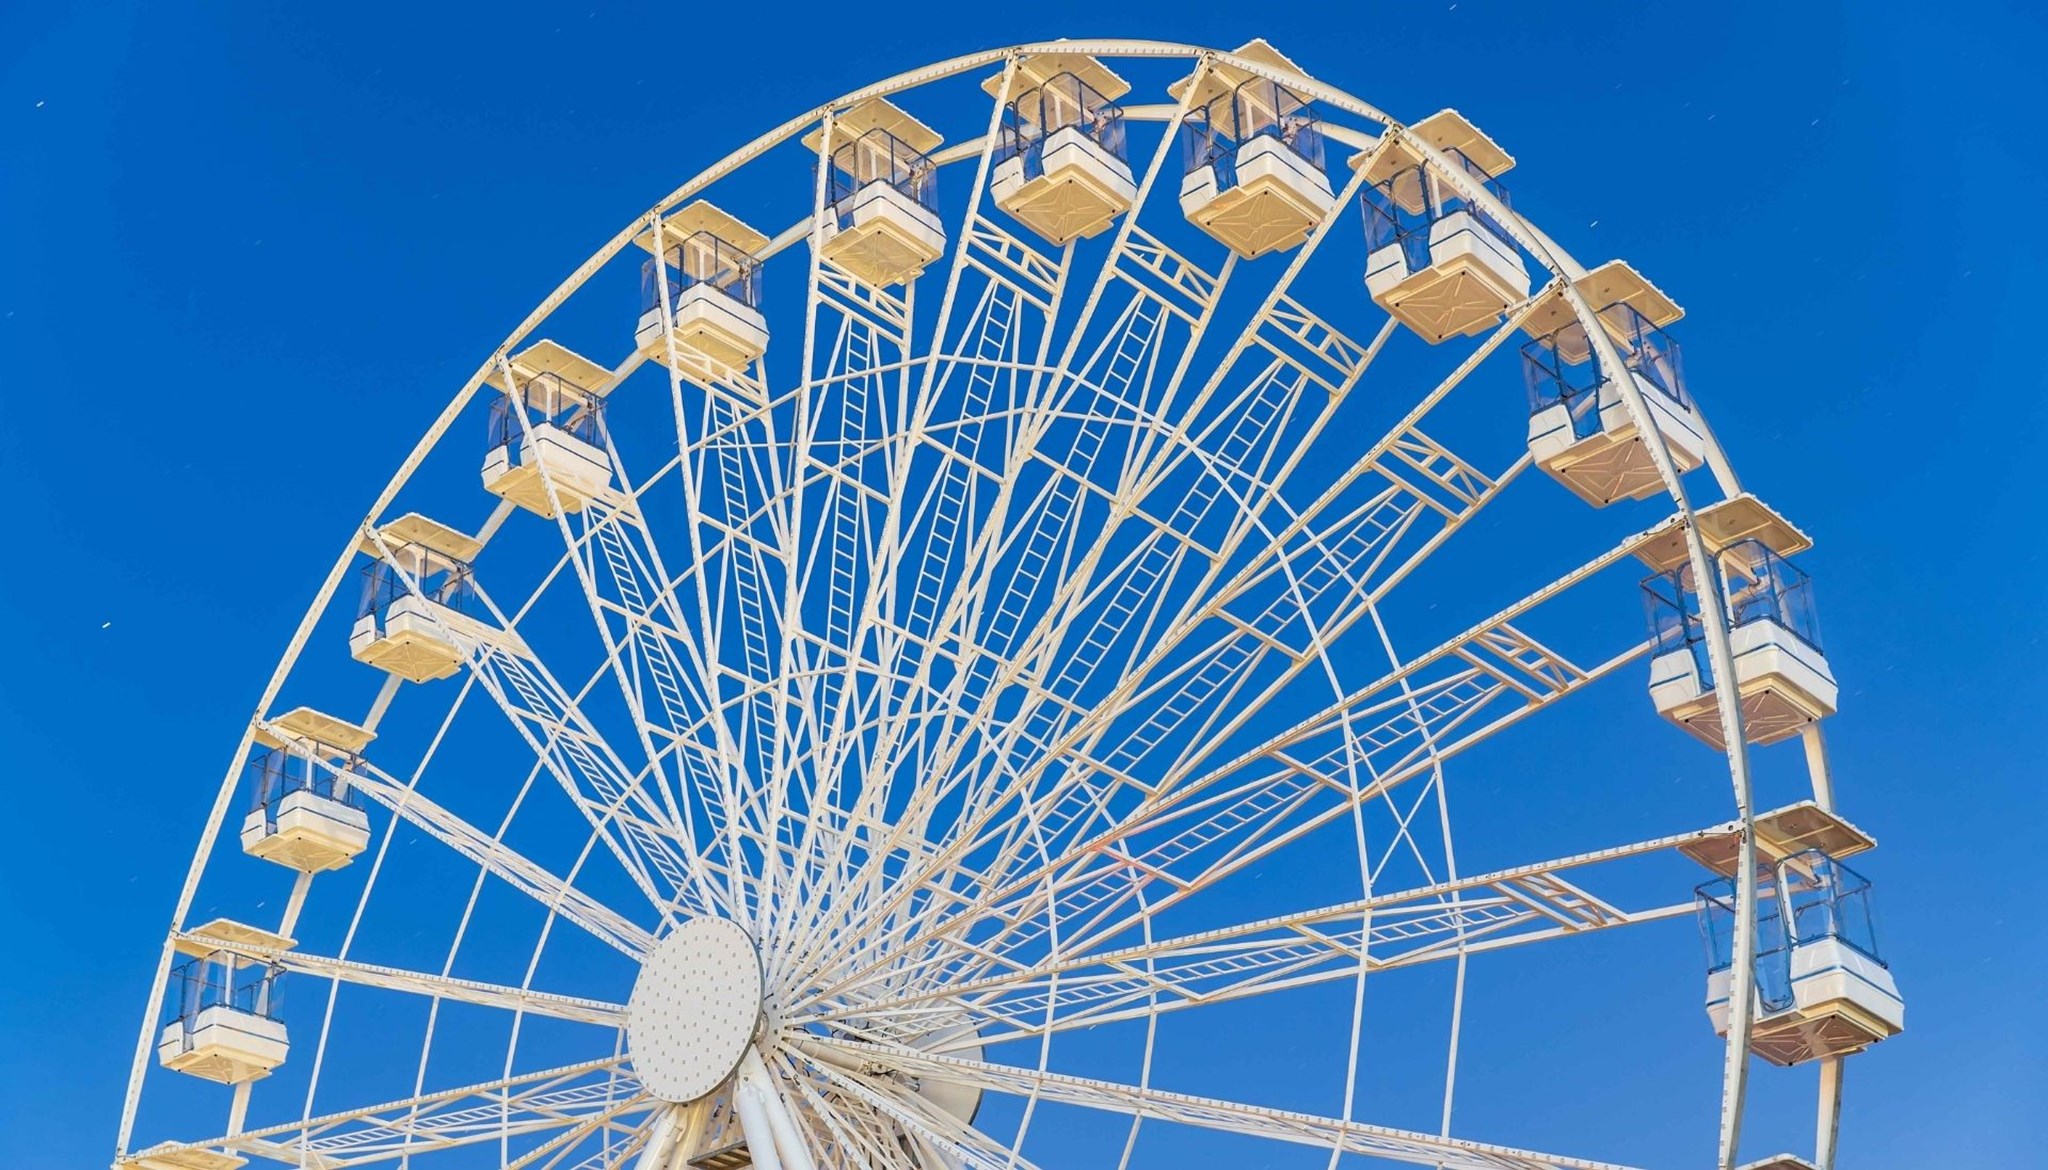 First Ferris wheel was created for 1893 World's Fair in Chicago